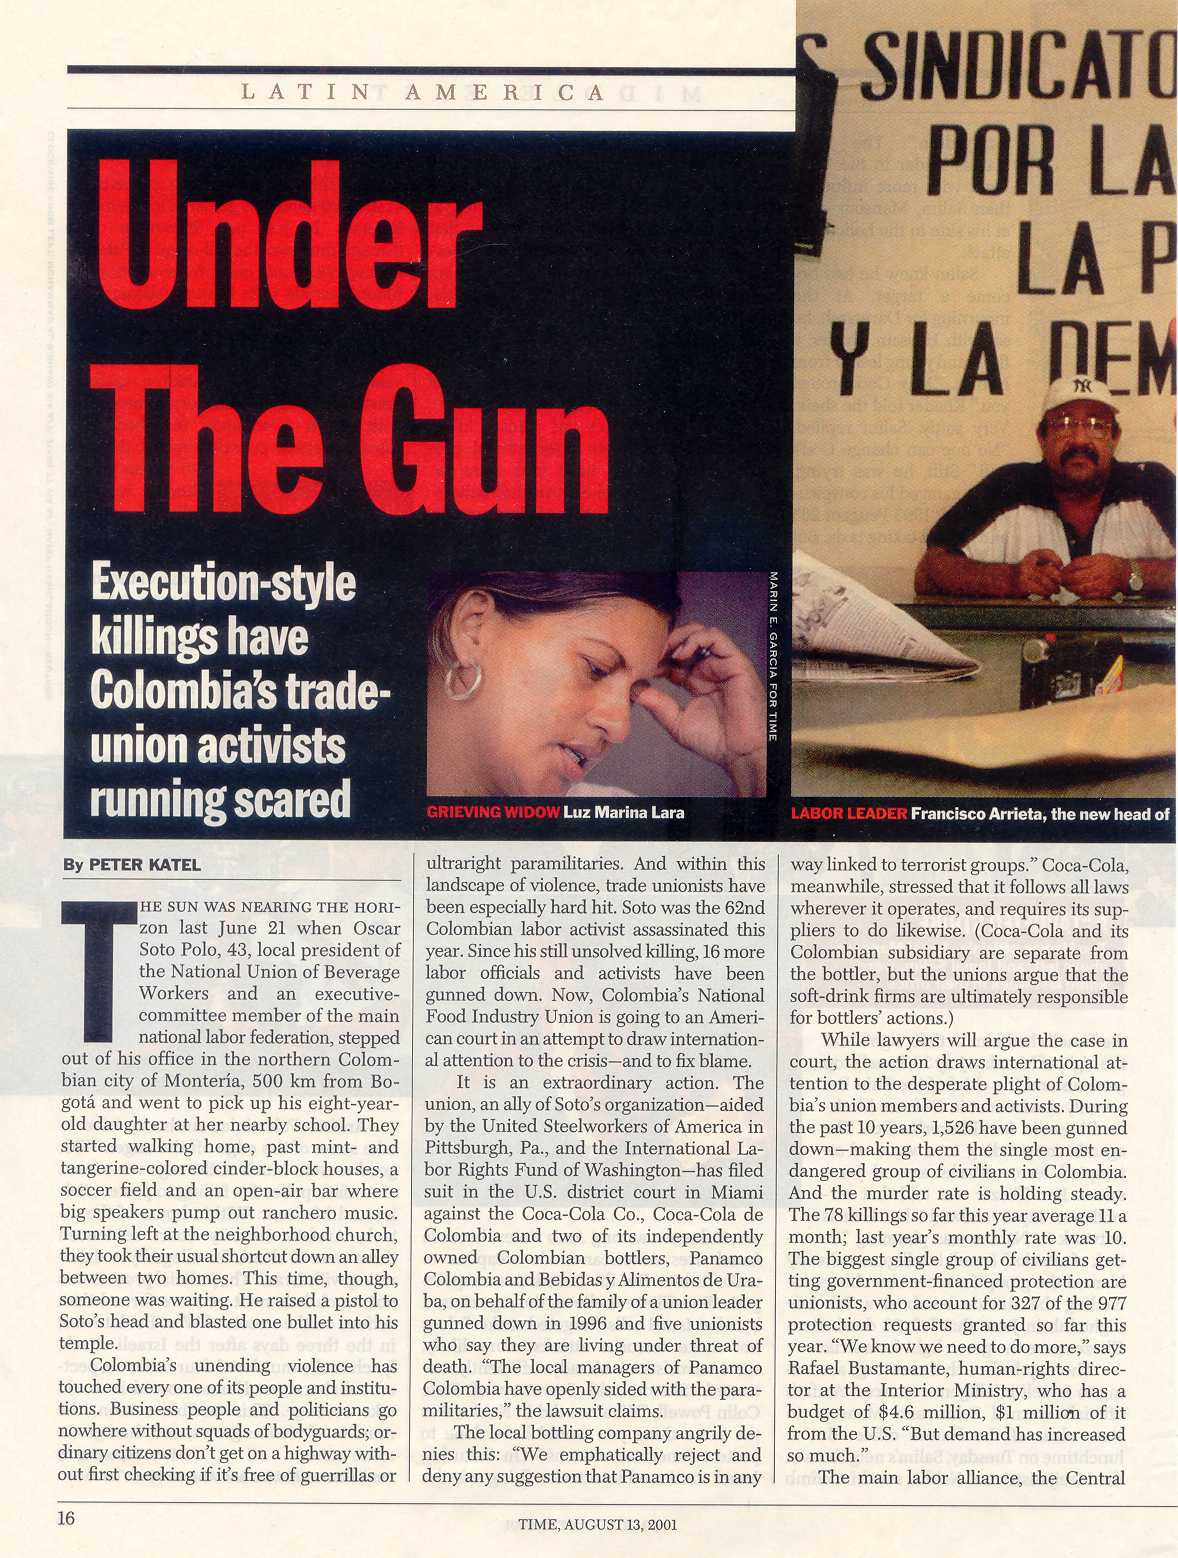 Peter Katel on Colombia Trade Unionist Executions – TIME Magazine (2001)